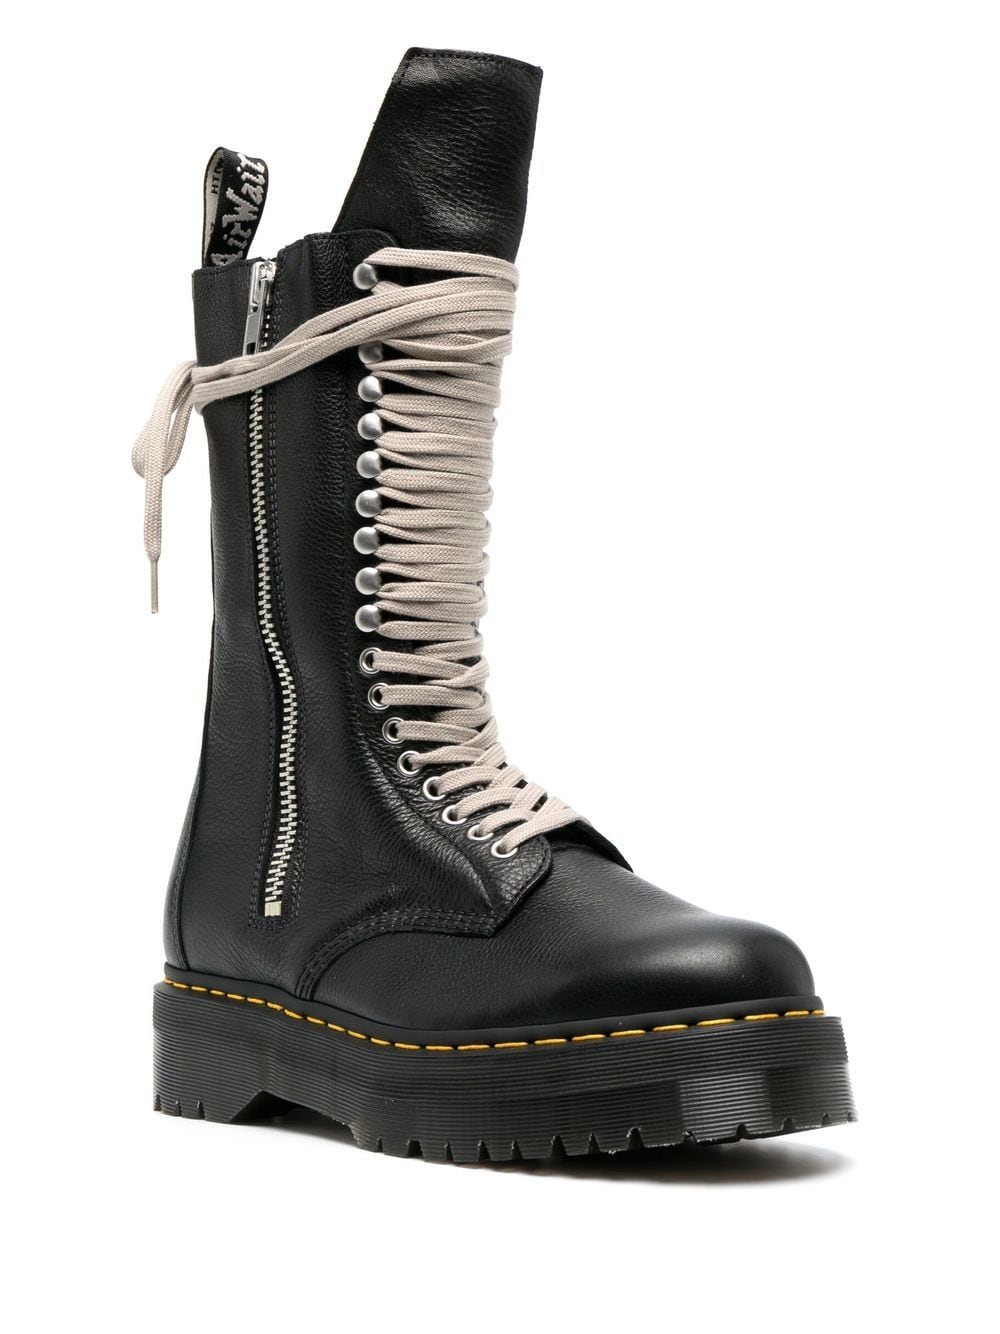 Rick Owens x Dr Martens lace-up Leather Boots - Farfetch